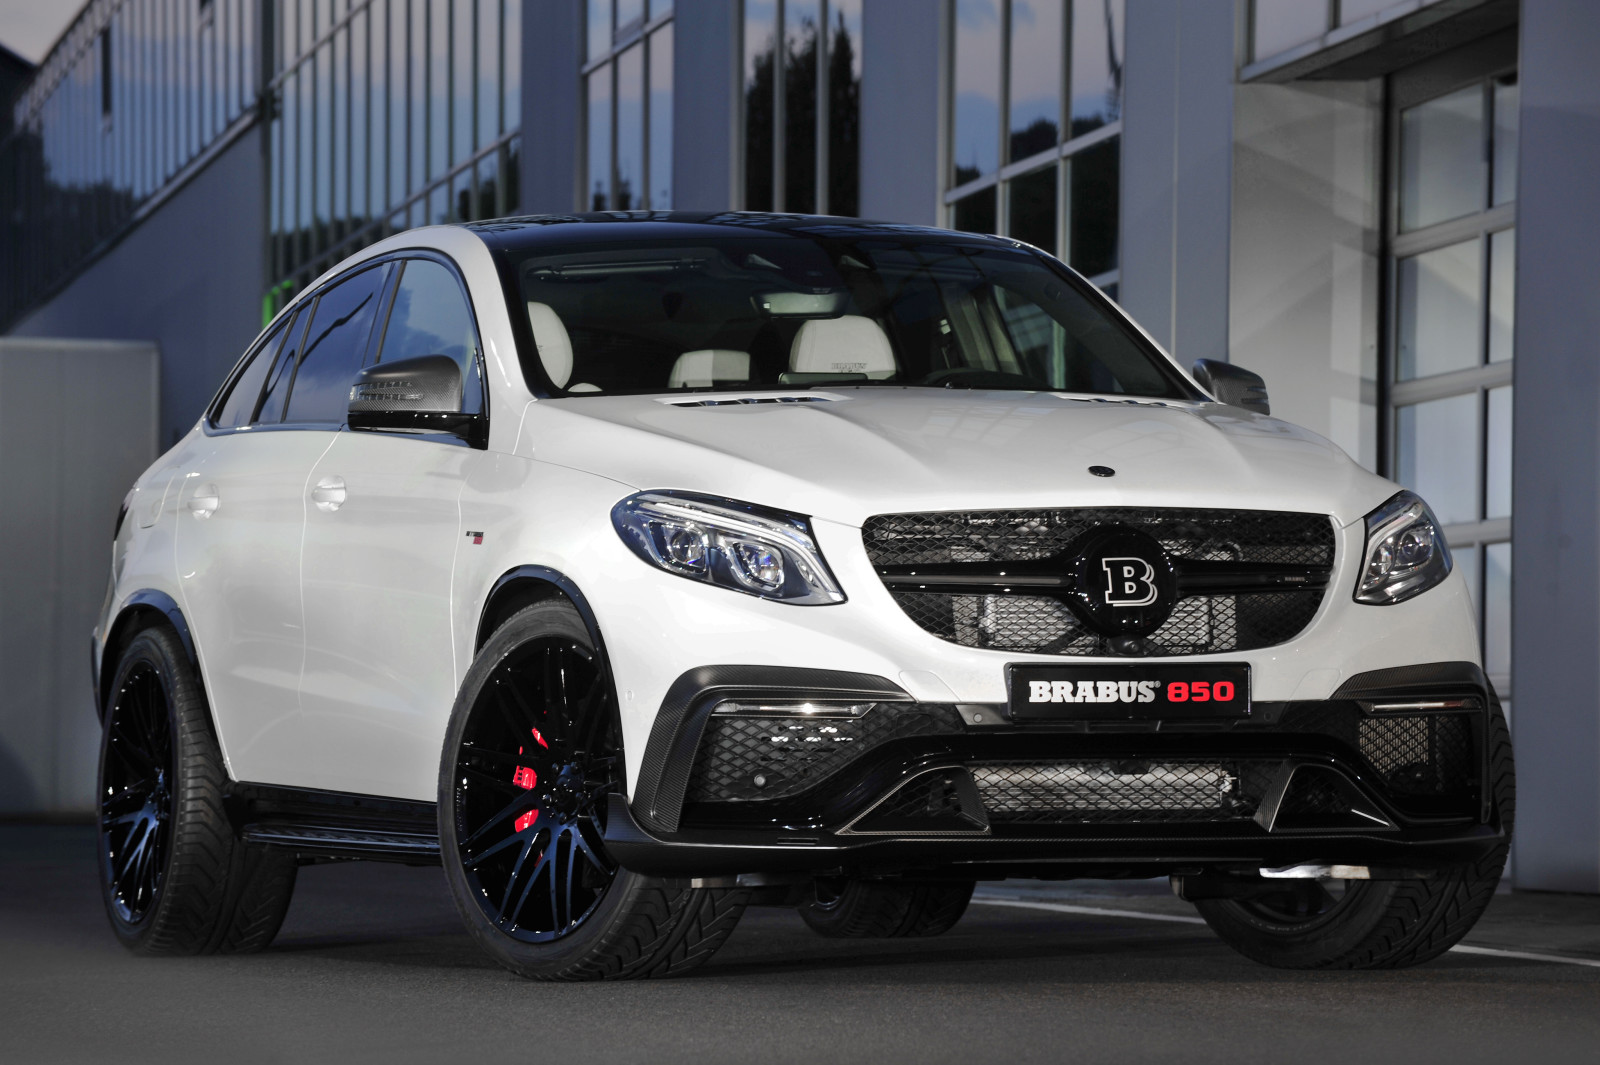 coupe, Mercedes-Benz, Mercedes, AMG, Brabus, 2015, C292, GLE-Class